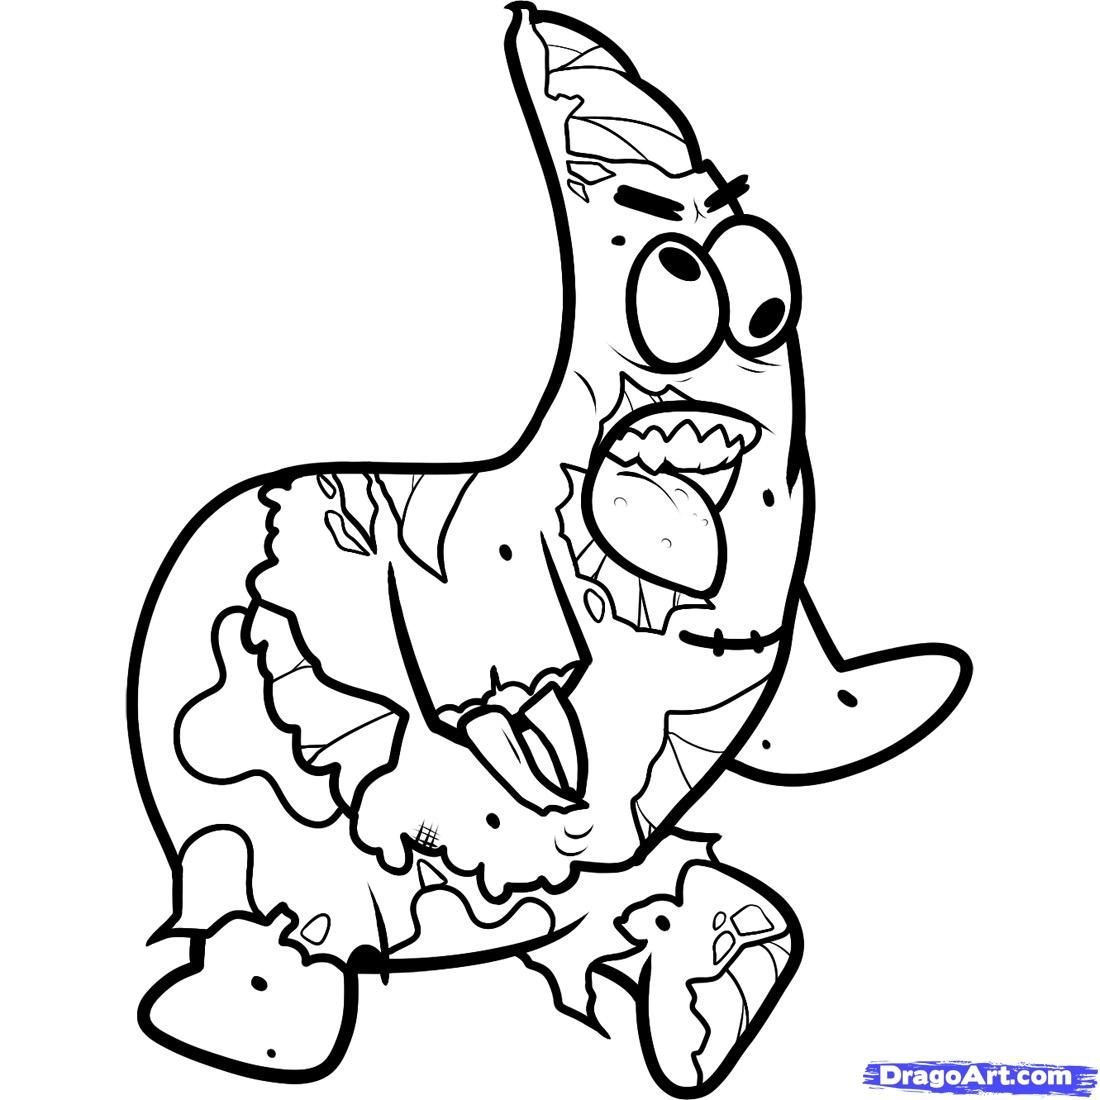 Cartoon Zombie Coloring Pages at GetColoringscom Free